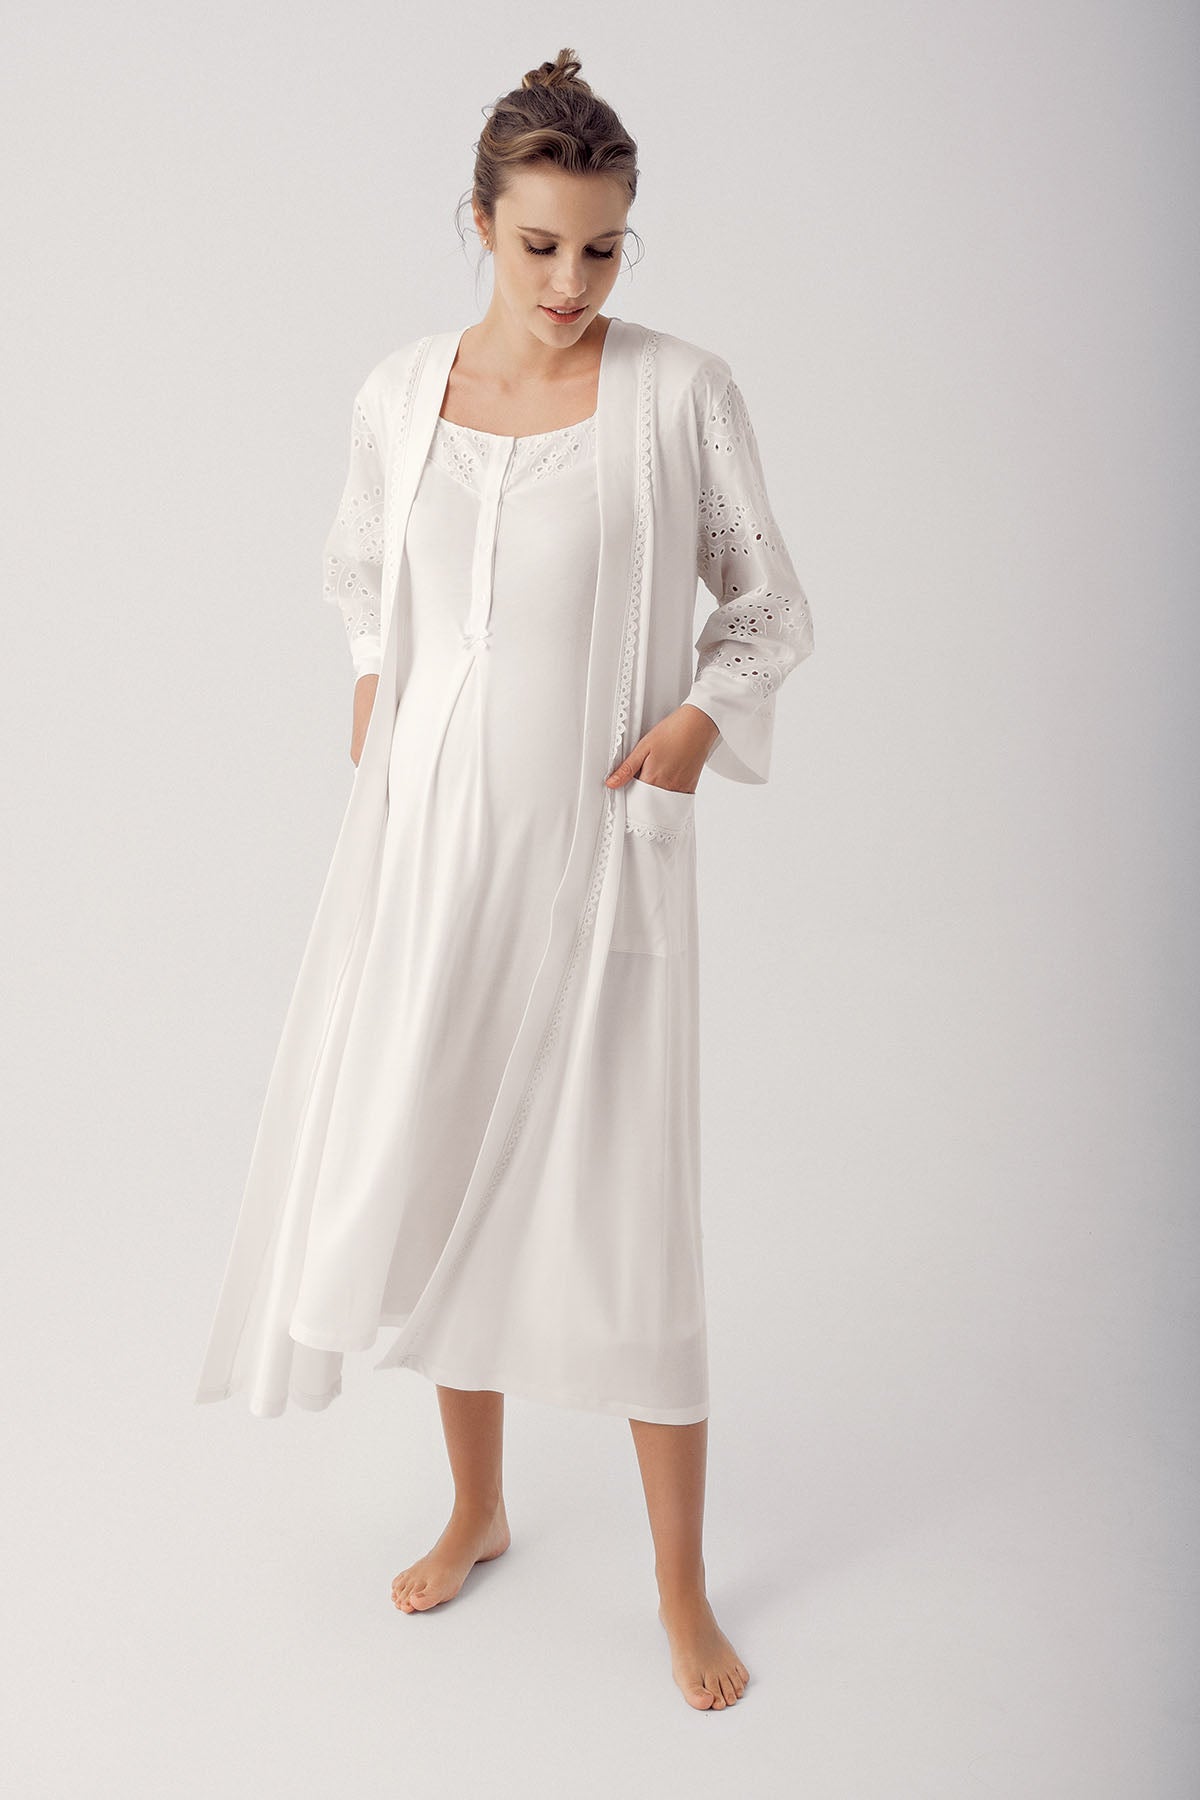 Shopymommy 14400 Motif Embroidered Maternity & Nursing Nightgown With Robe Ecru